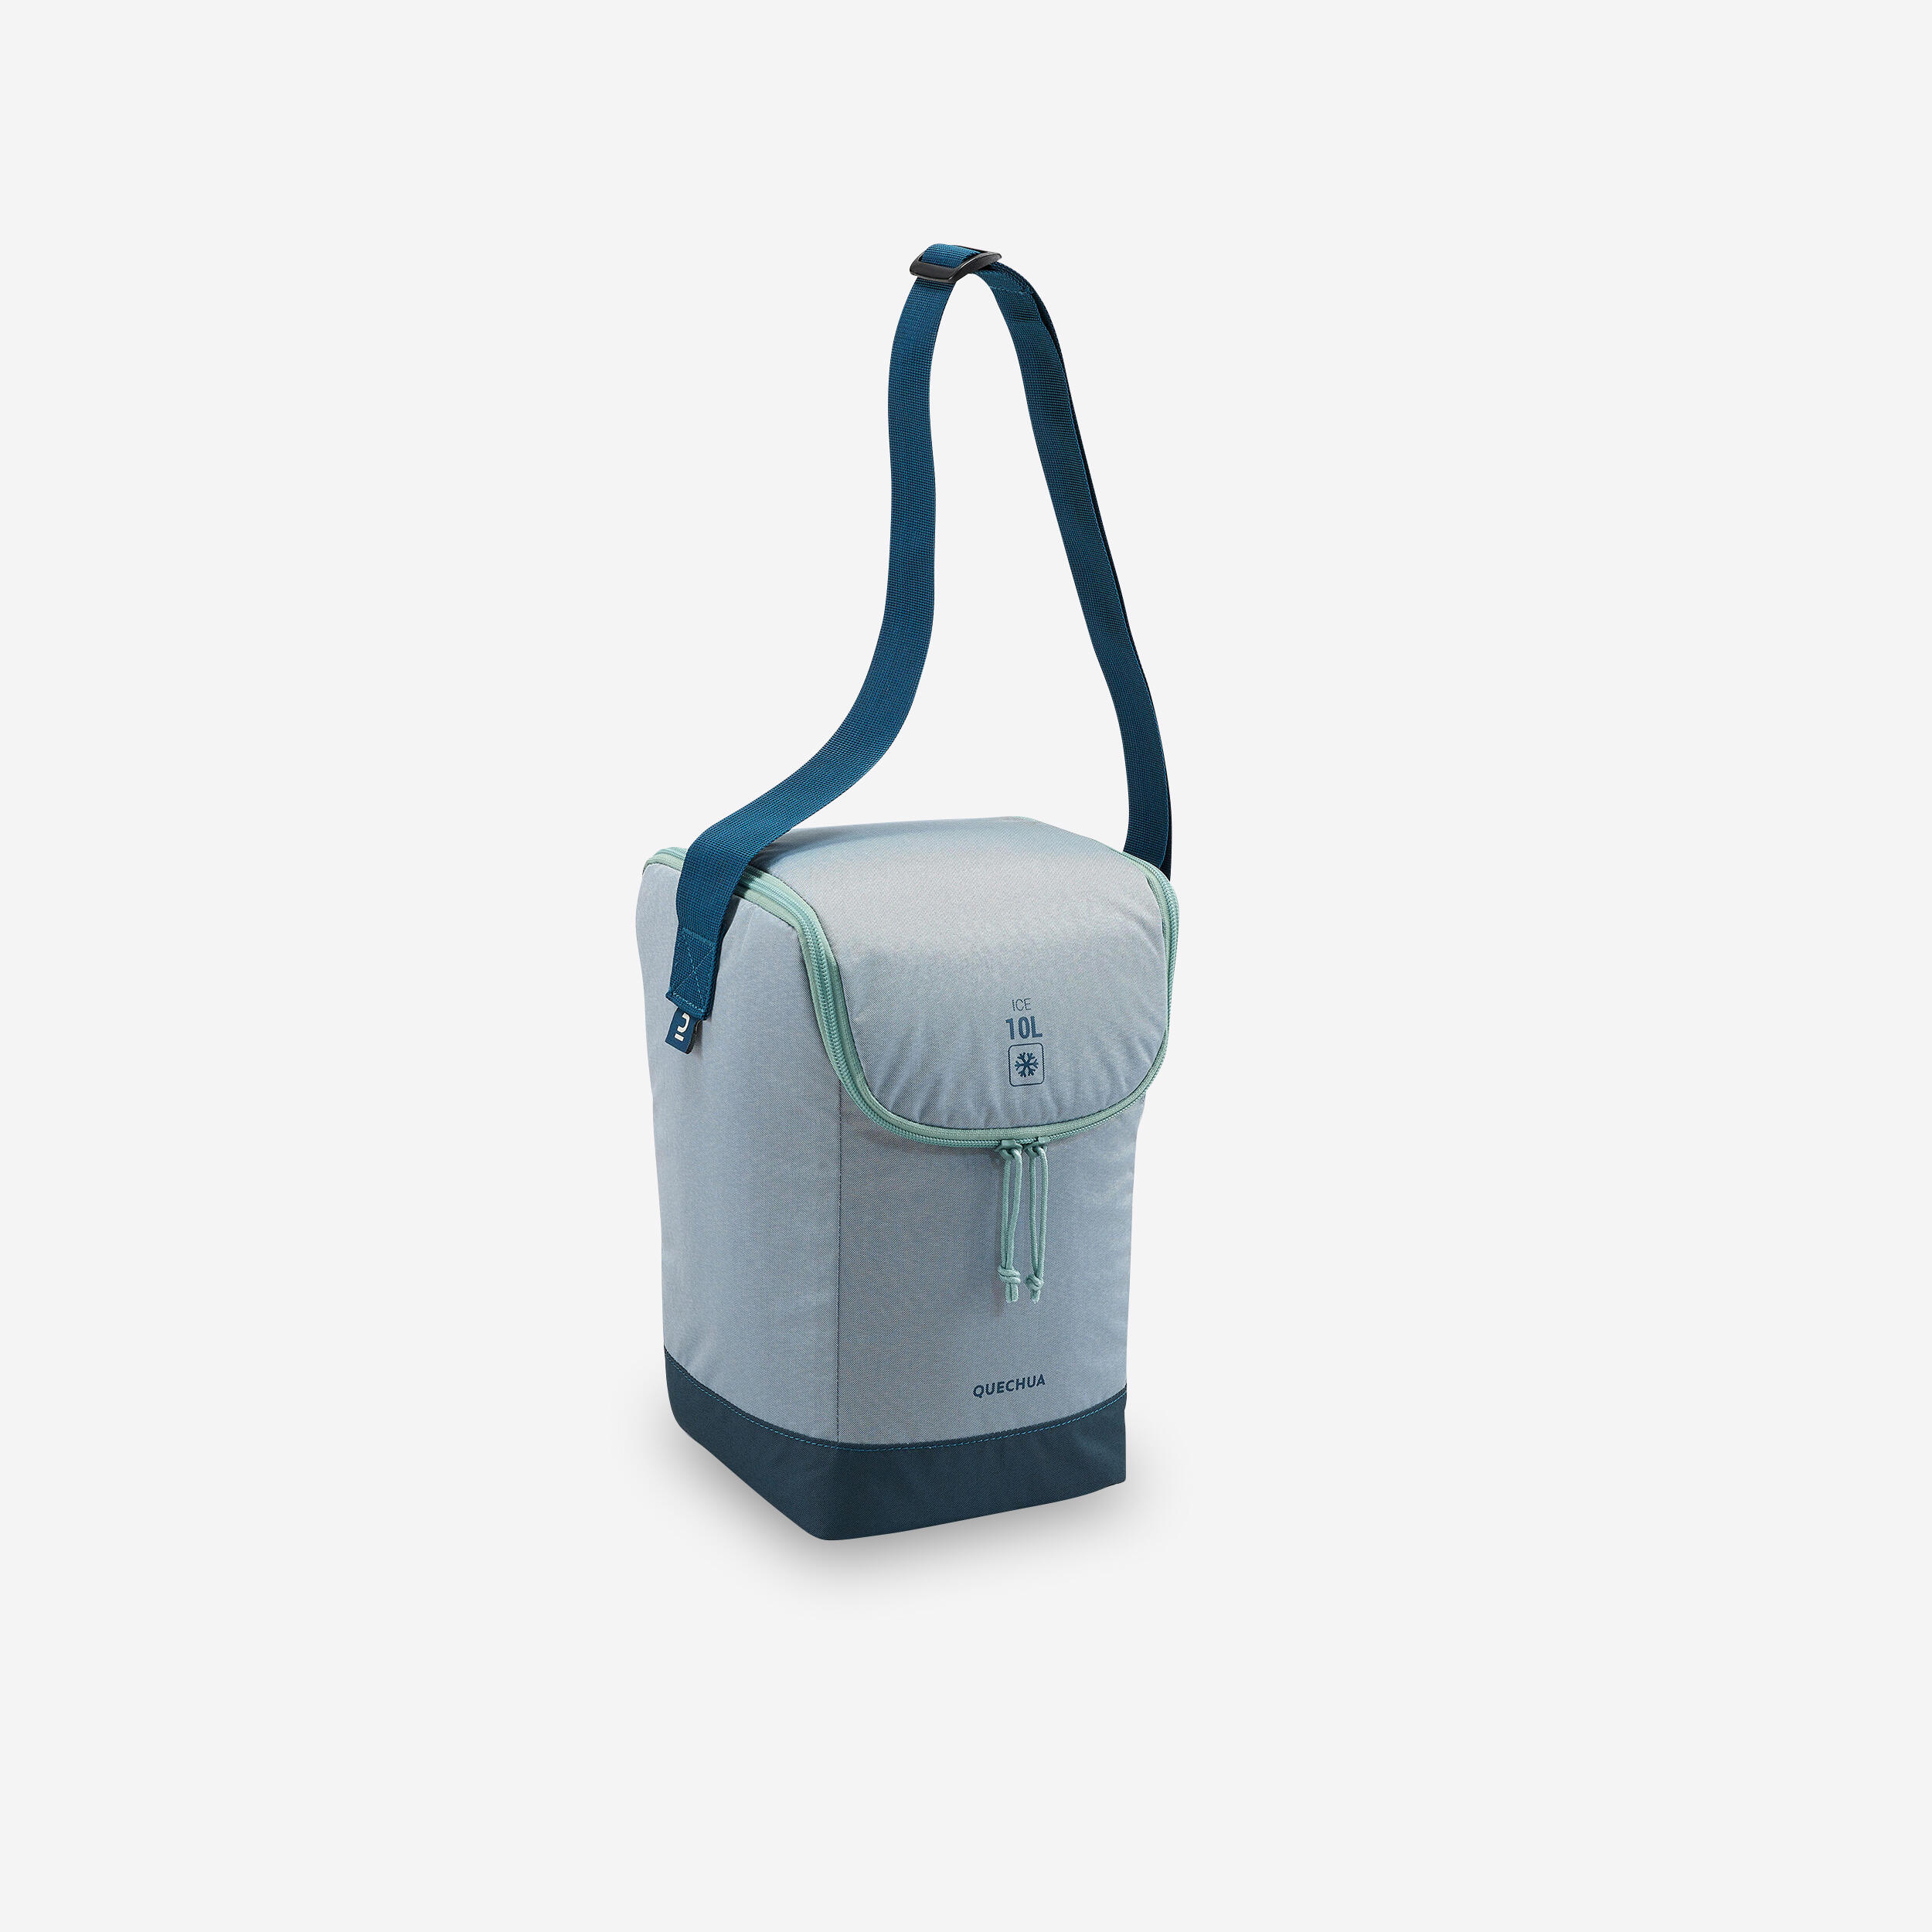 SOFT CAMPING ICE CHEST - 10L 1/9